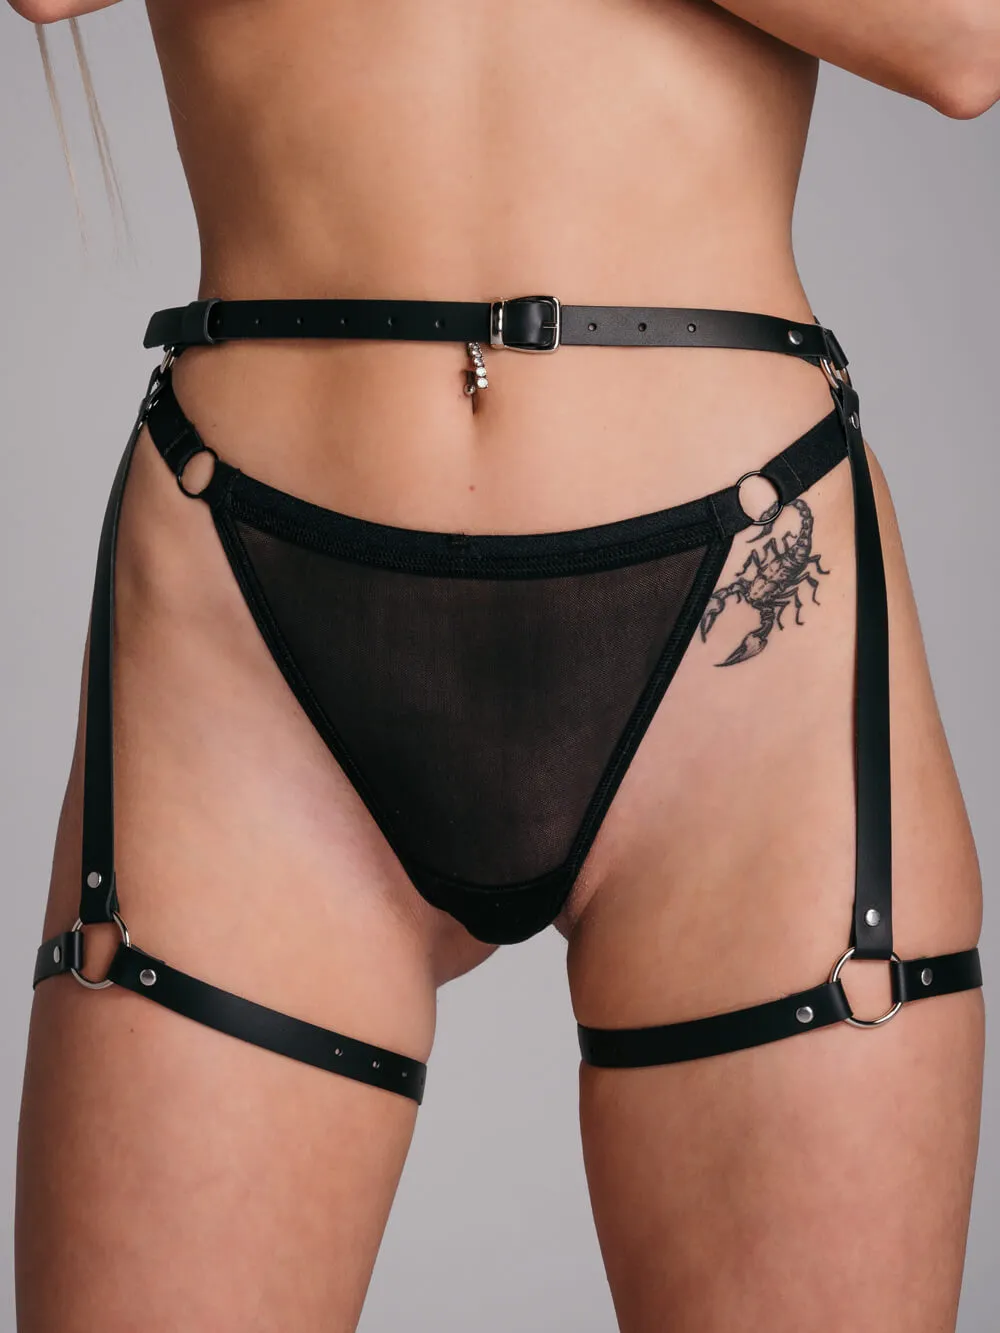 Provocative Leather Women's Lingerie - Texas Leather Fringe Thong and Leather Garter.